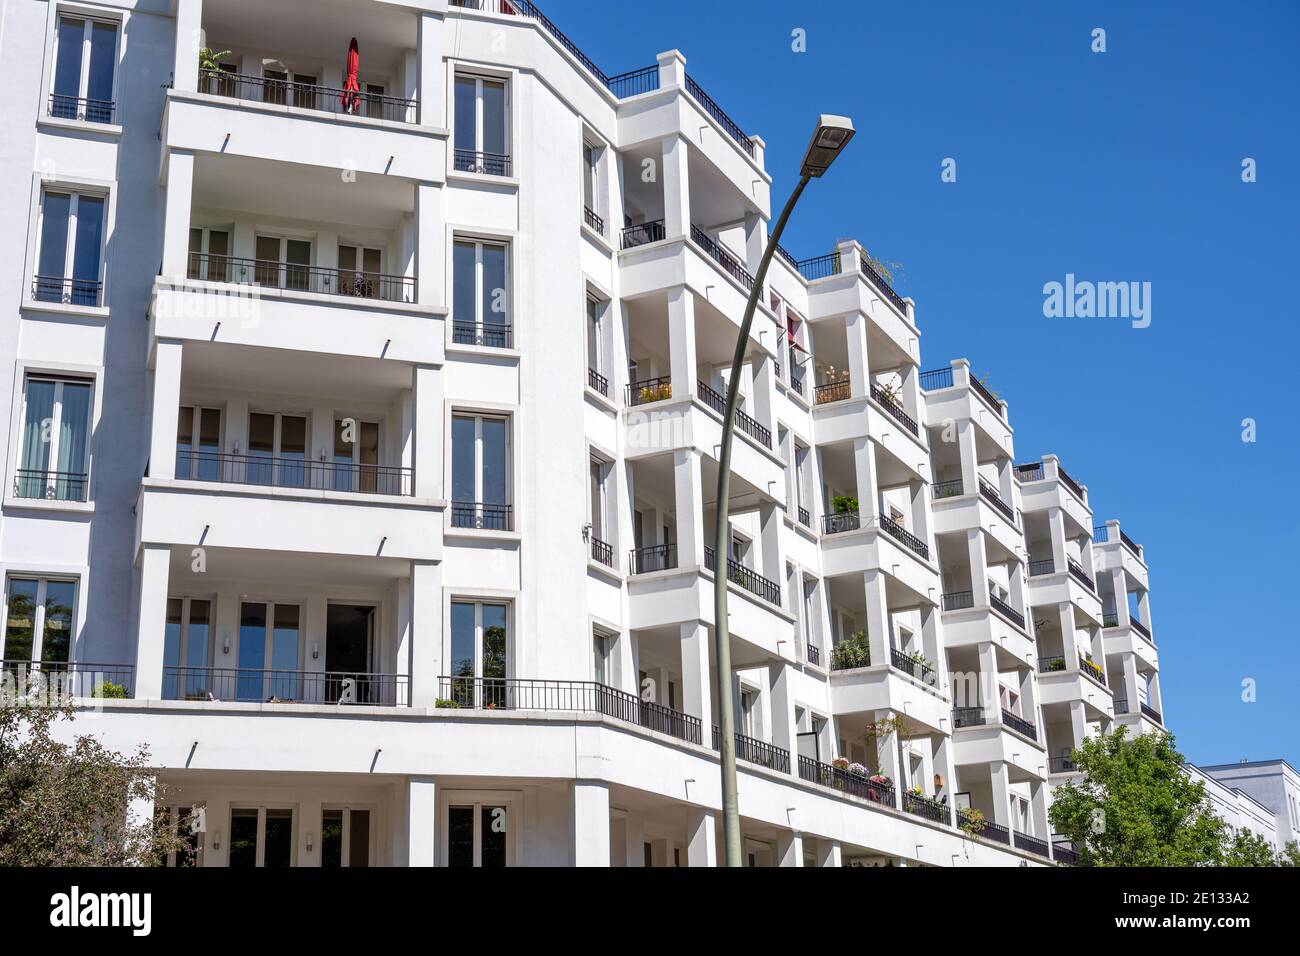 White modern apartment buildings seen in Berlin, Germany Stock Photo